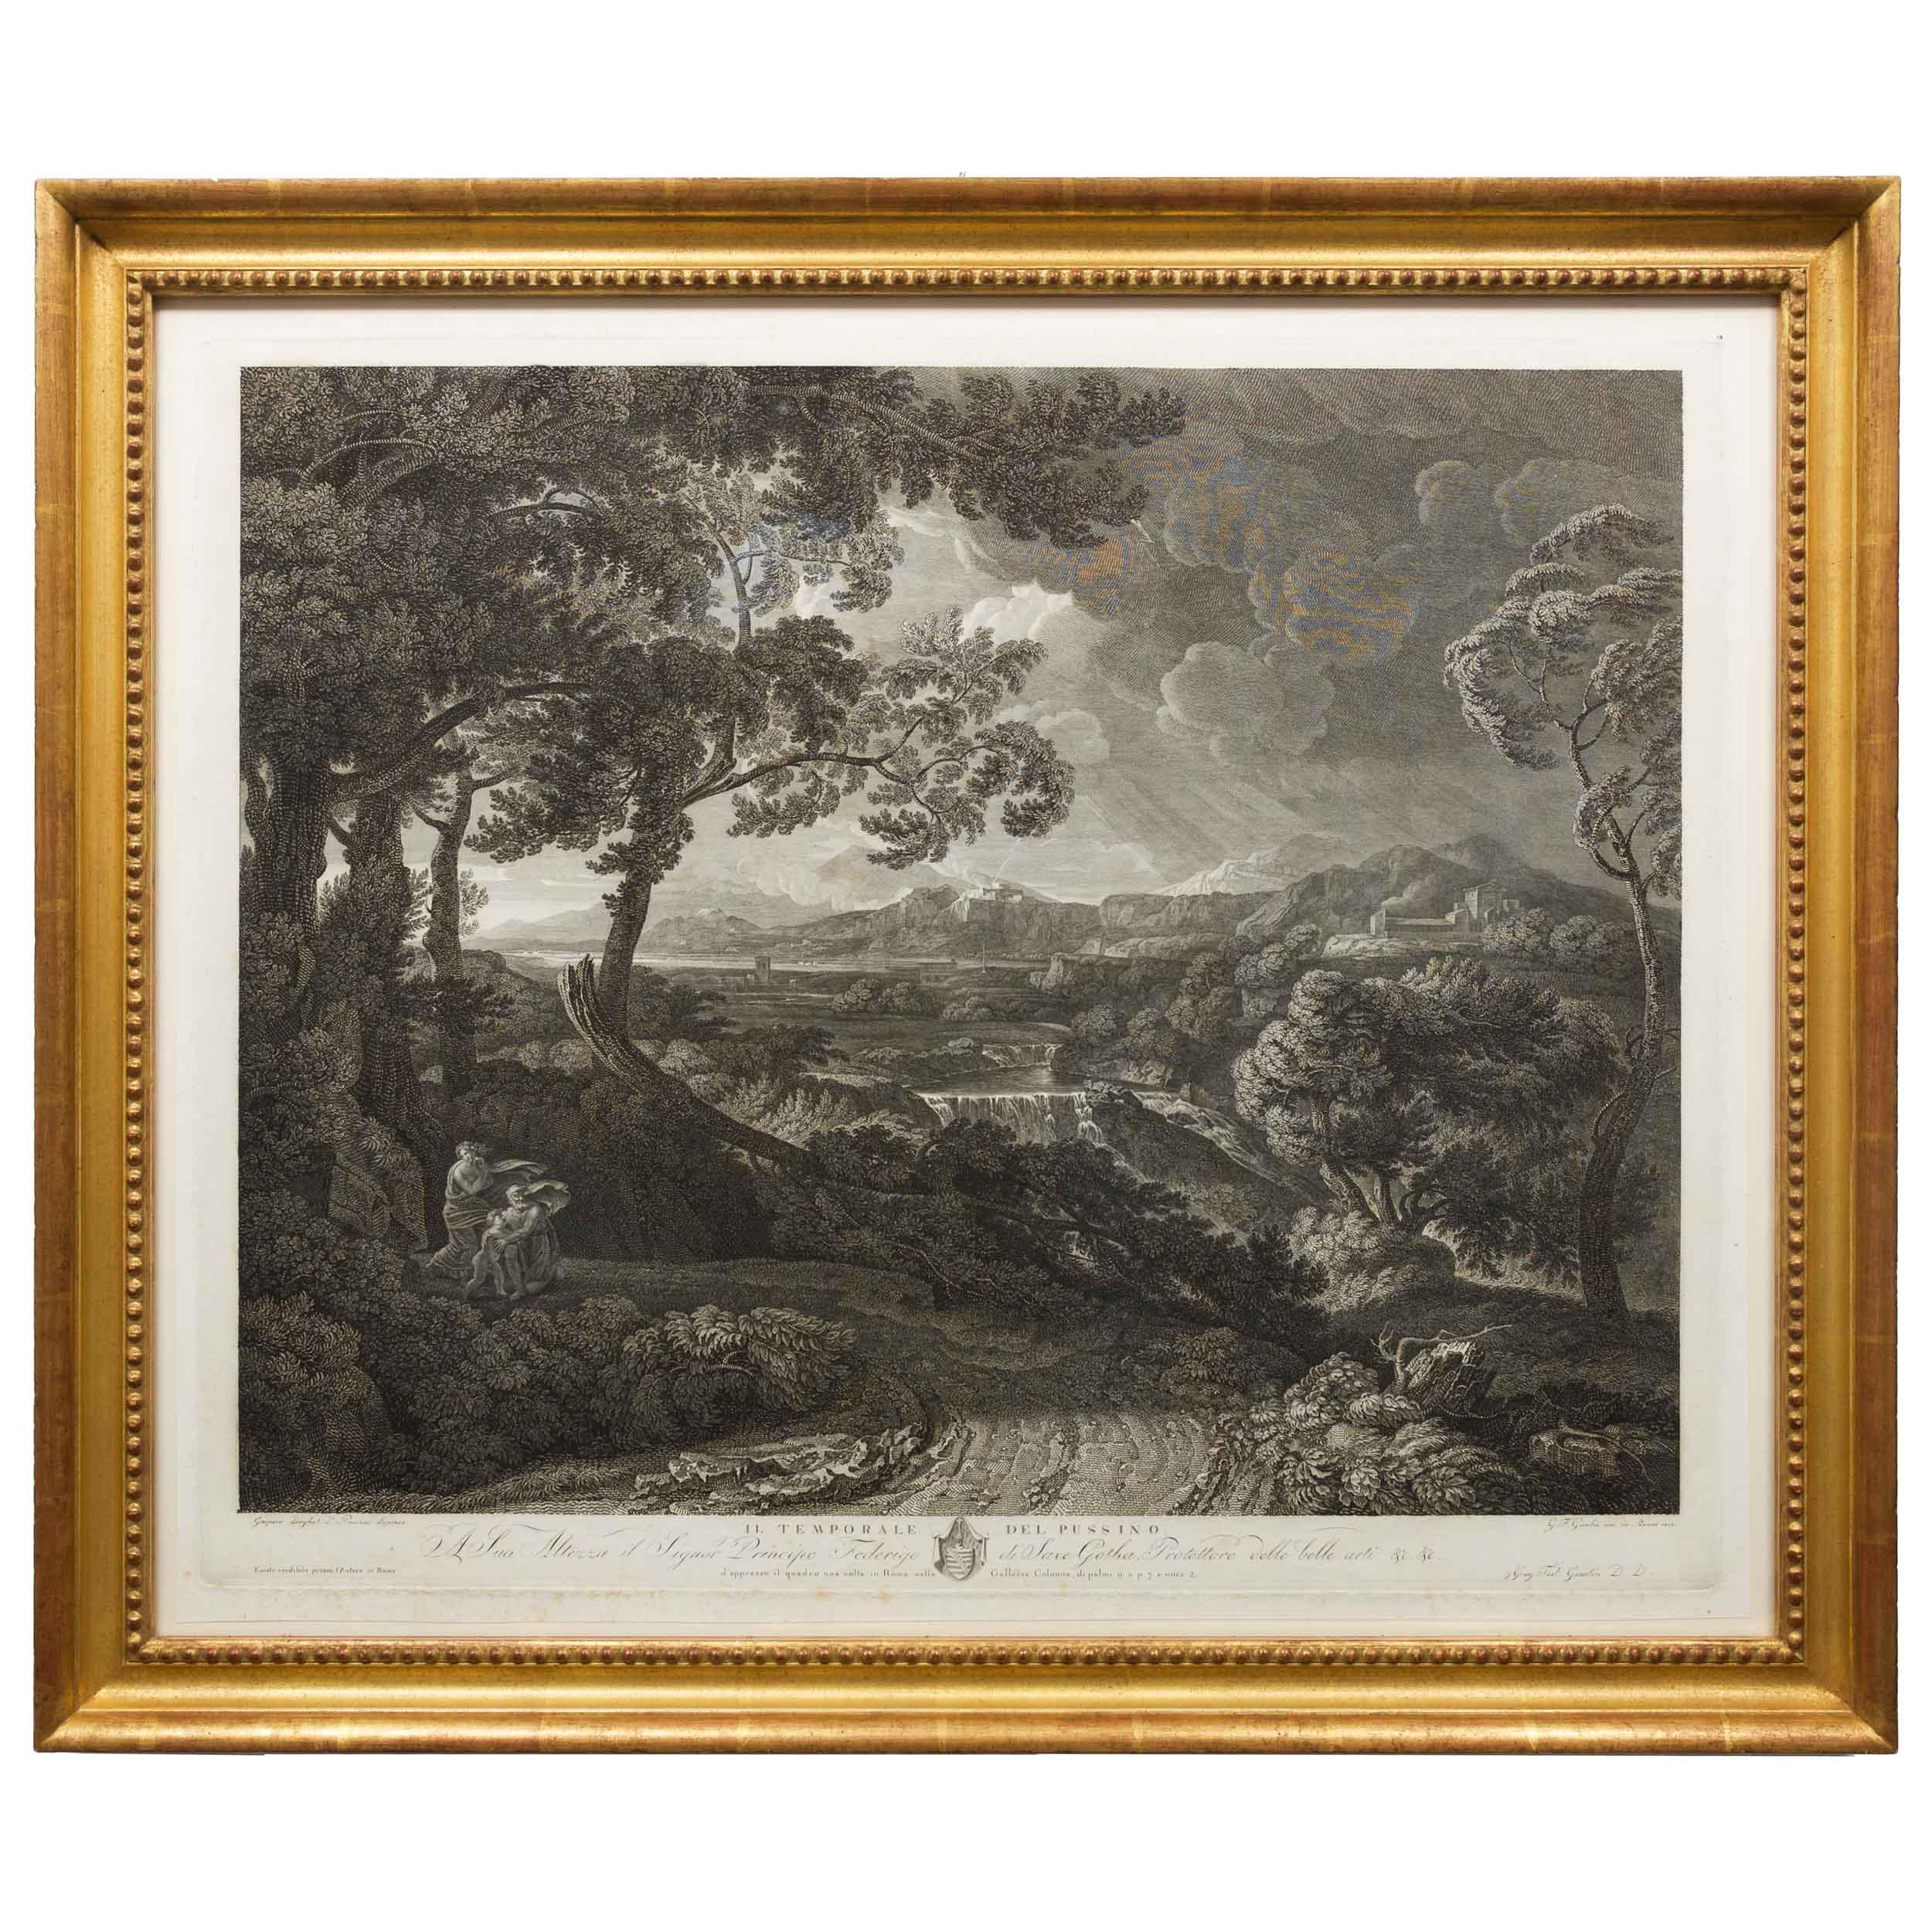 Rare Engraving "Il Temporale Del Pussino" by Wilhelm Gmelin After Poussin circa 